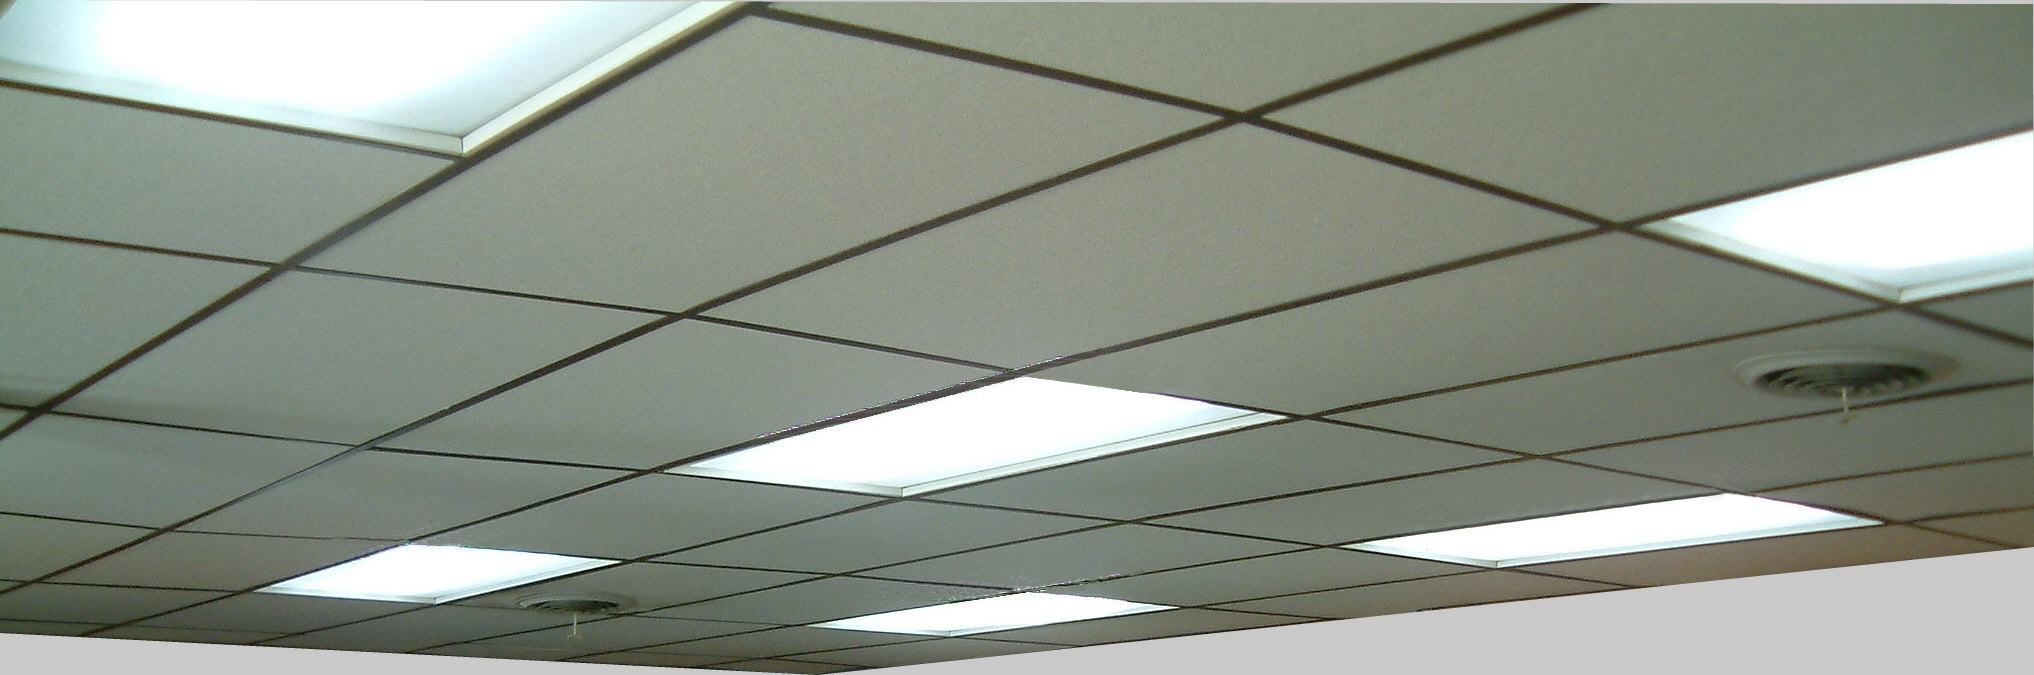 2x4 Drop Ceiling Light Covers2034 X 675